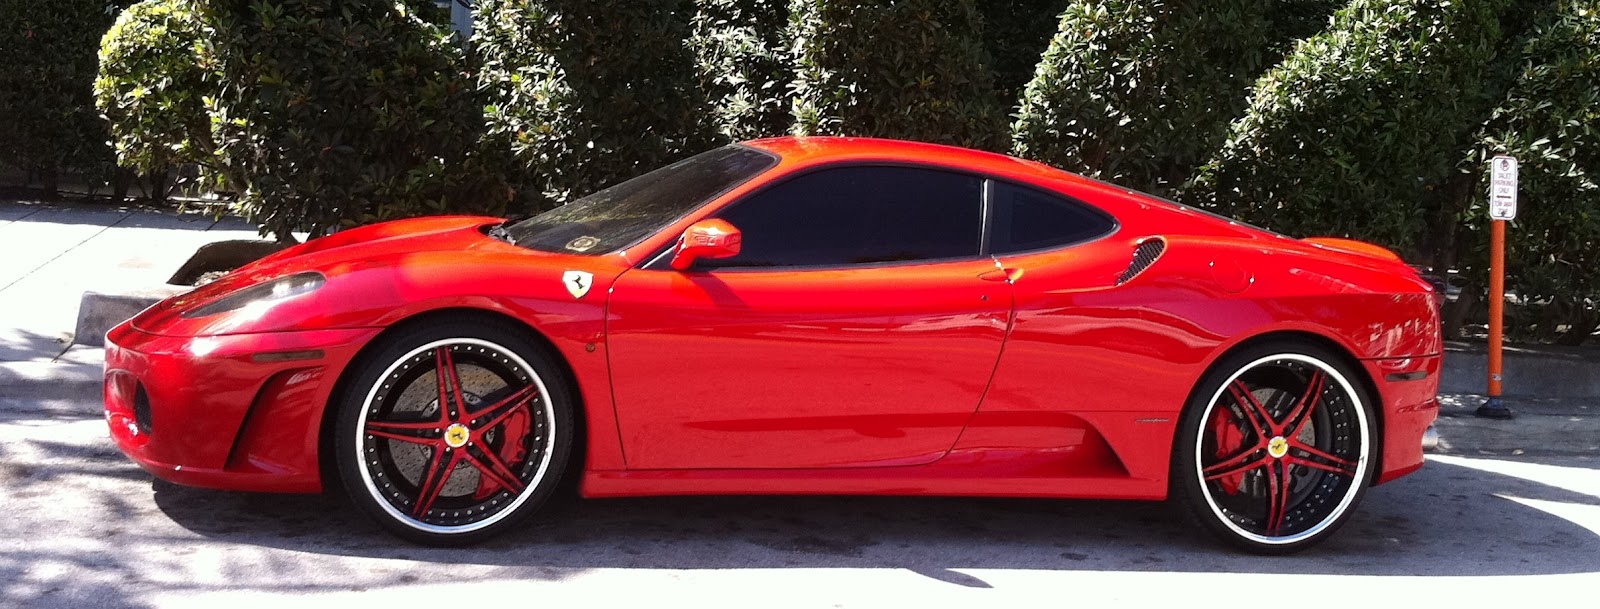 Red Ferrari f430 in Midtown Miami with red and black custom rims 